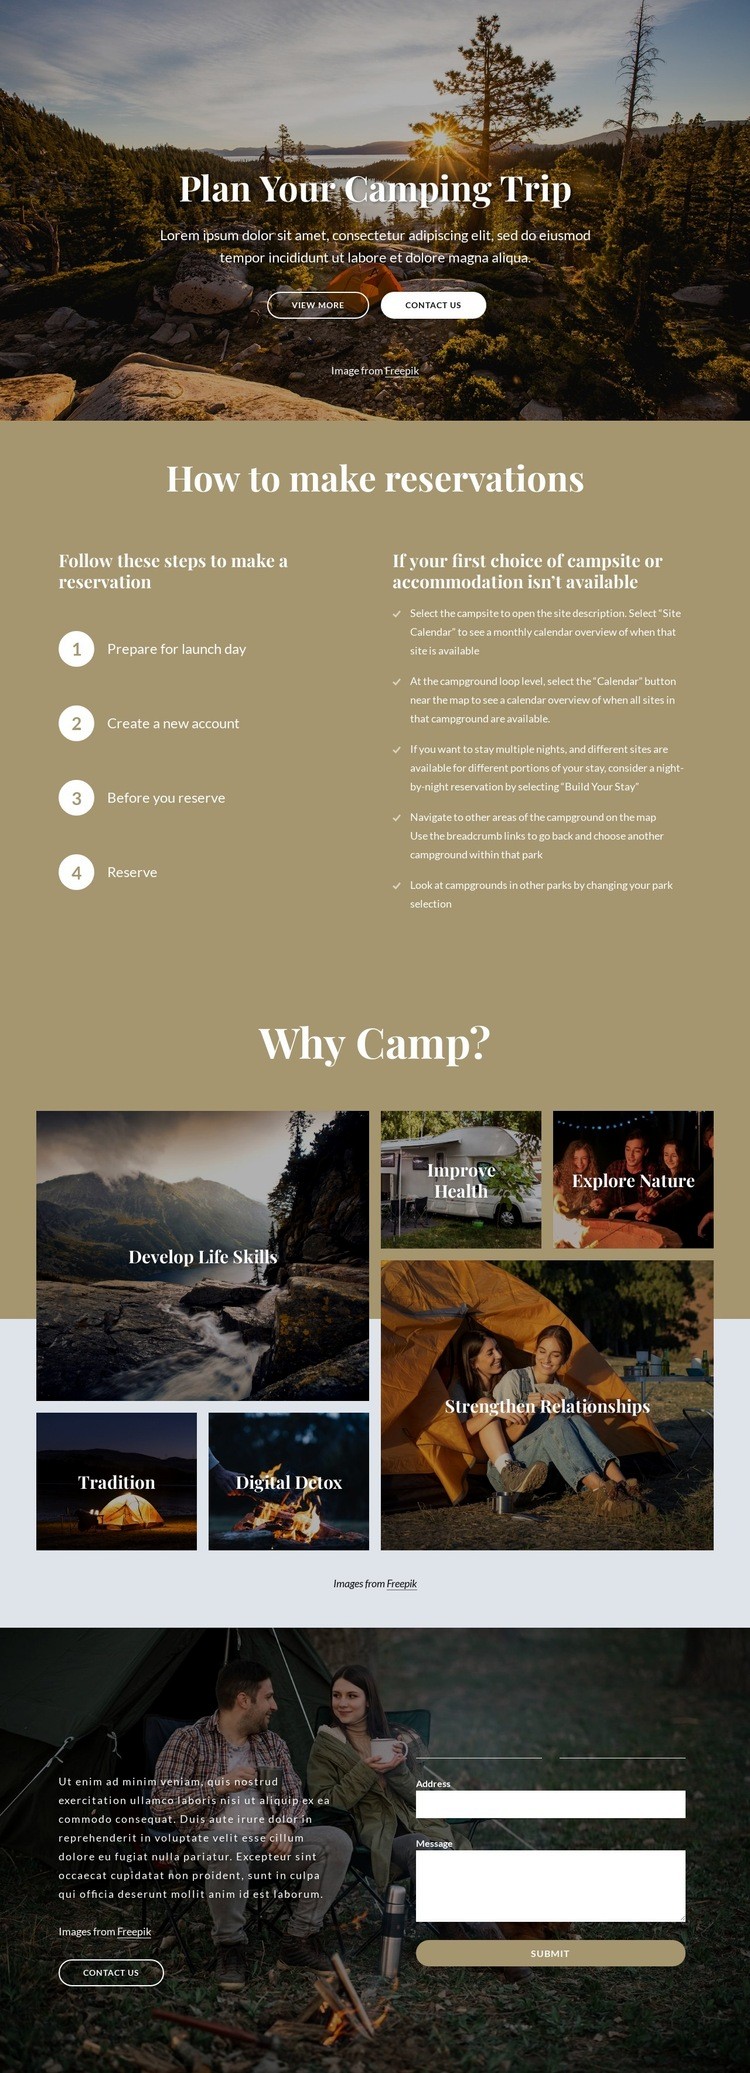 Plan your camping trip Web Page Design